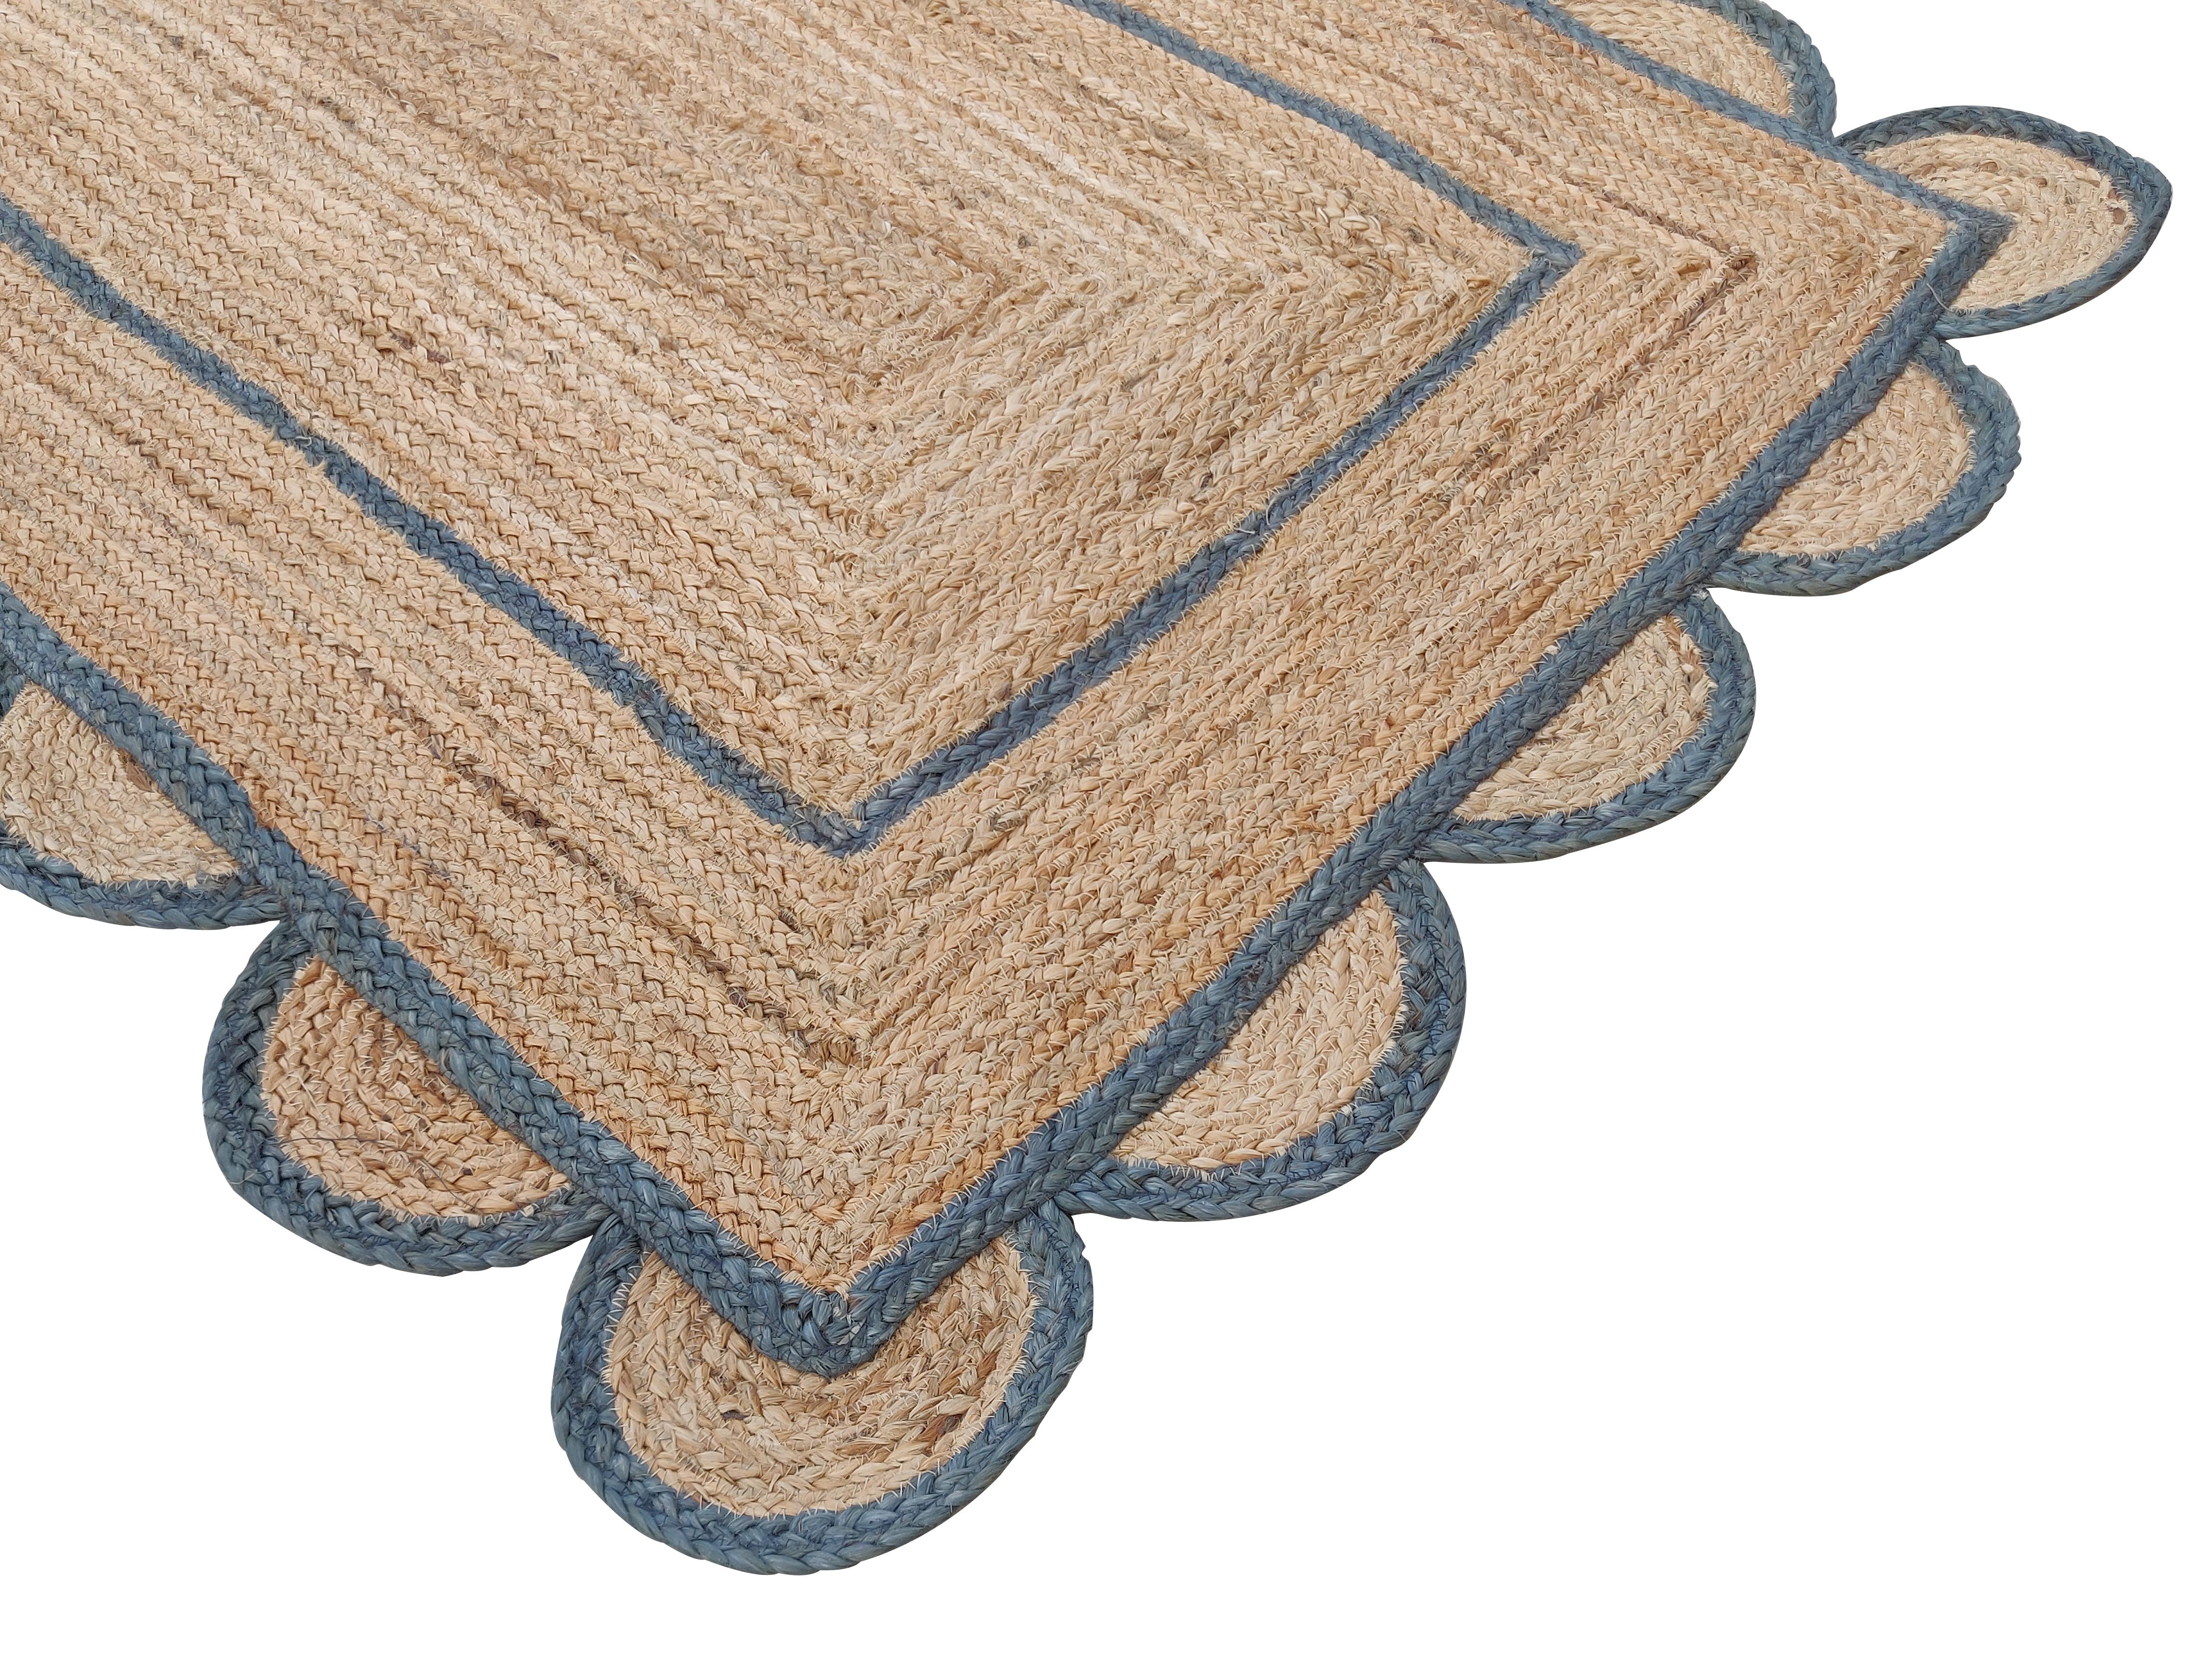 Handmade Jute Scalloped Rug, Grey And Natural Jute Dhurrie -4'x6'

These special flat-weave dhurries are hand-woven with 15 ply 100% cotton yarn. Due to the special manufacturing techniques used to create our rugs, the size and color of each piece